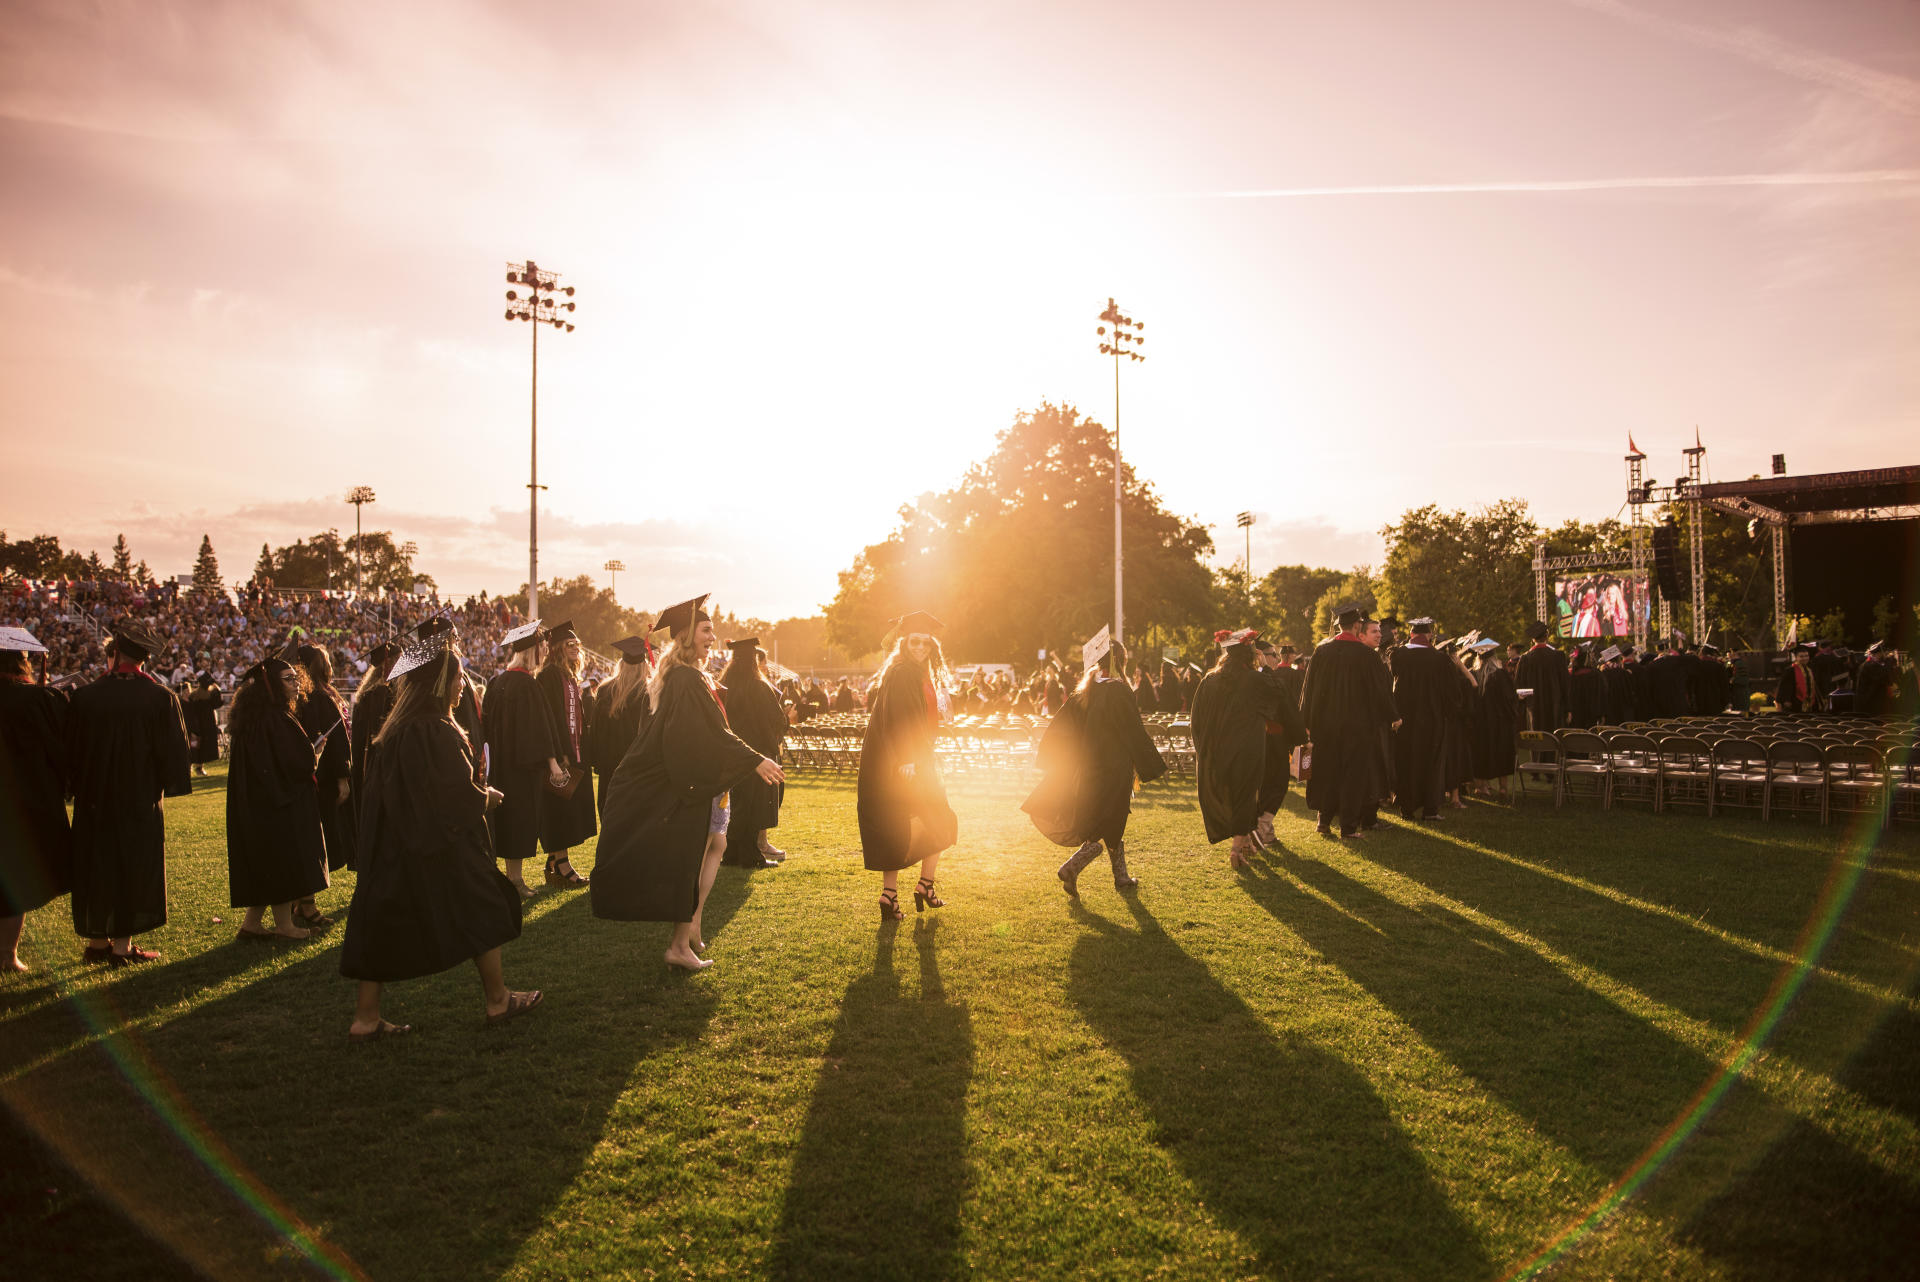 New;ly graduated students return to their seats after receiving their diplomas in front of a sunset backdrop.